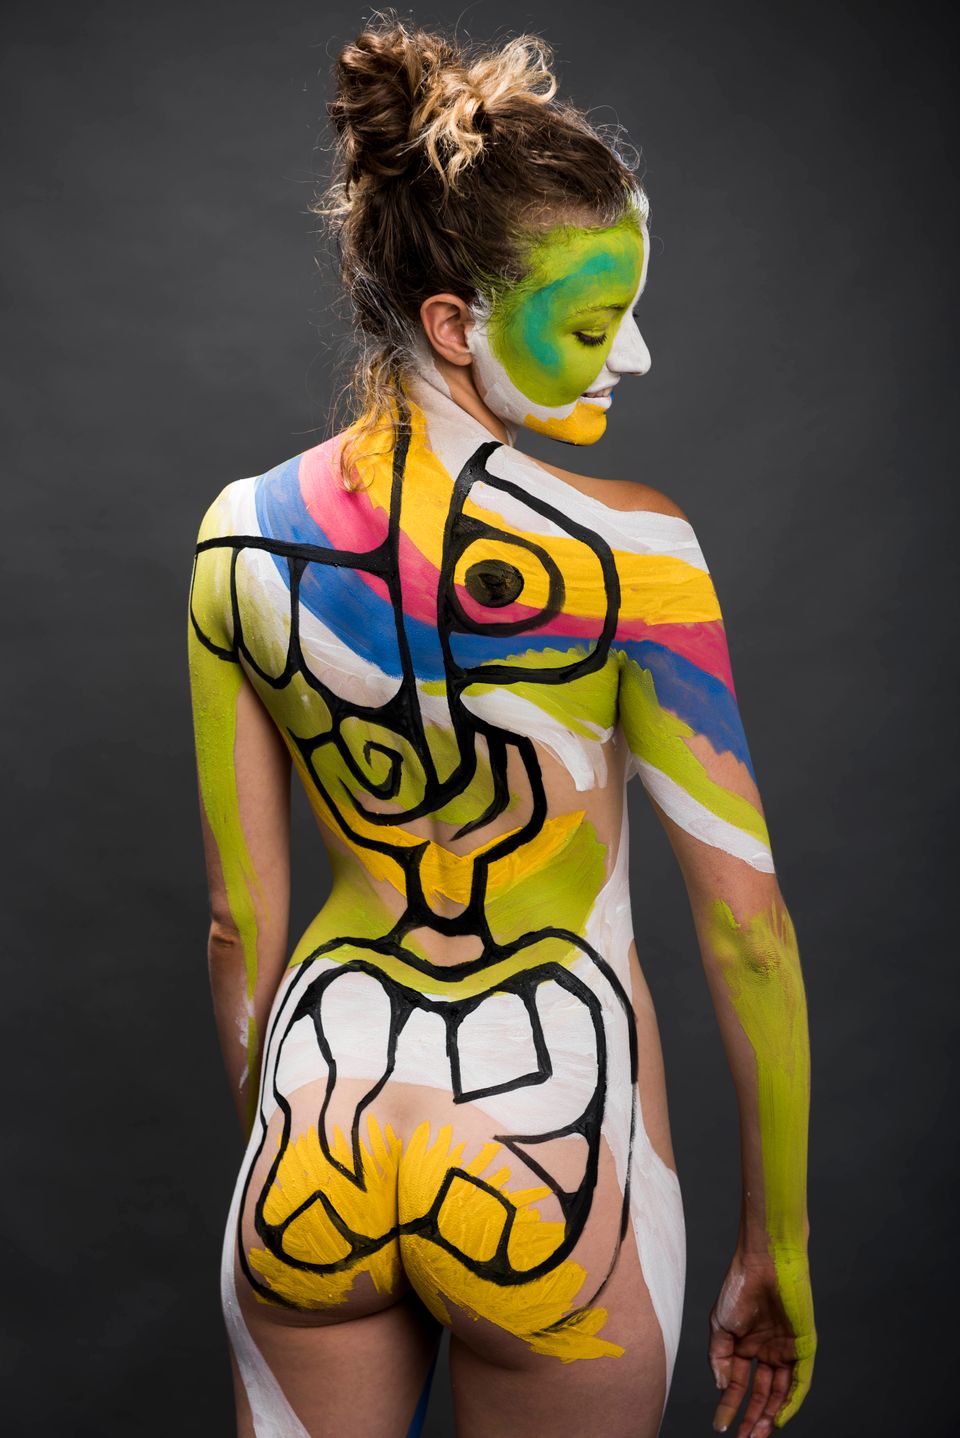 claribel frausto recommends body painted naked girls pic